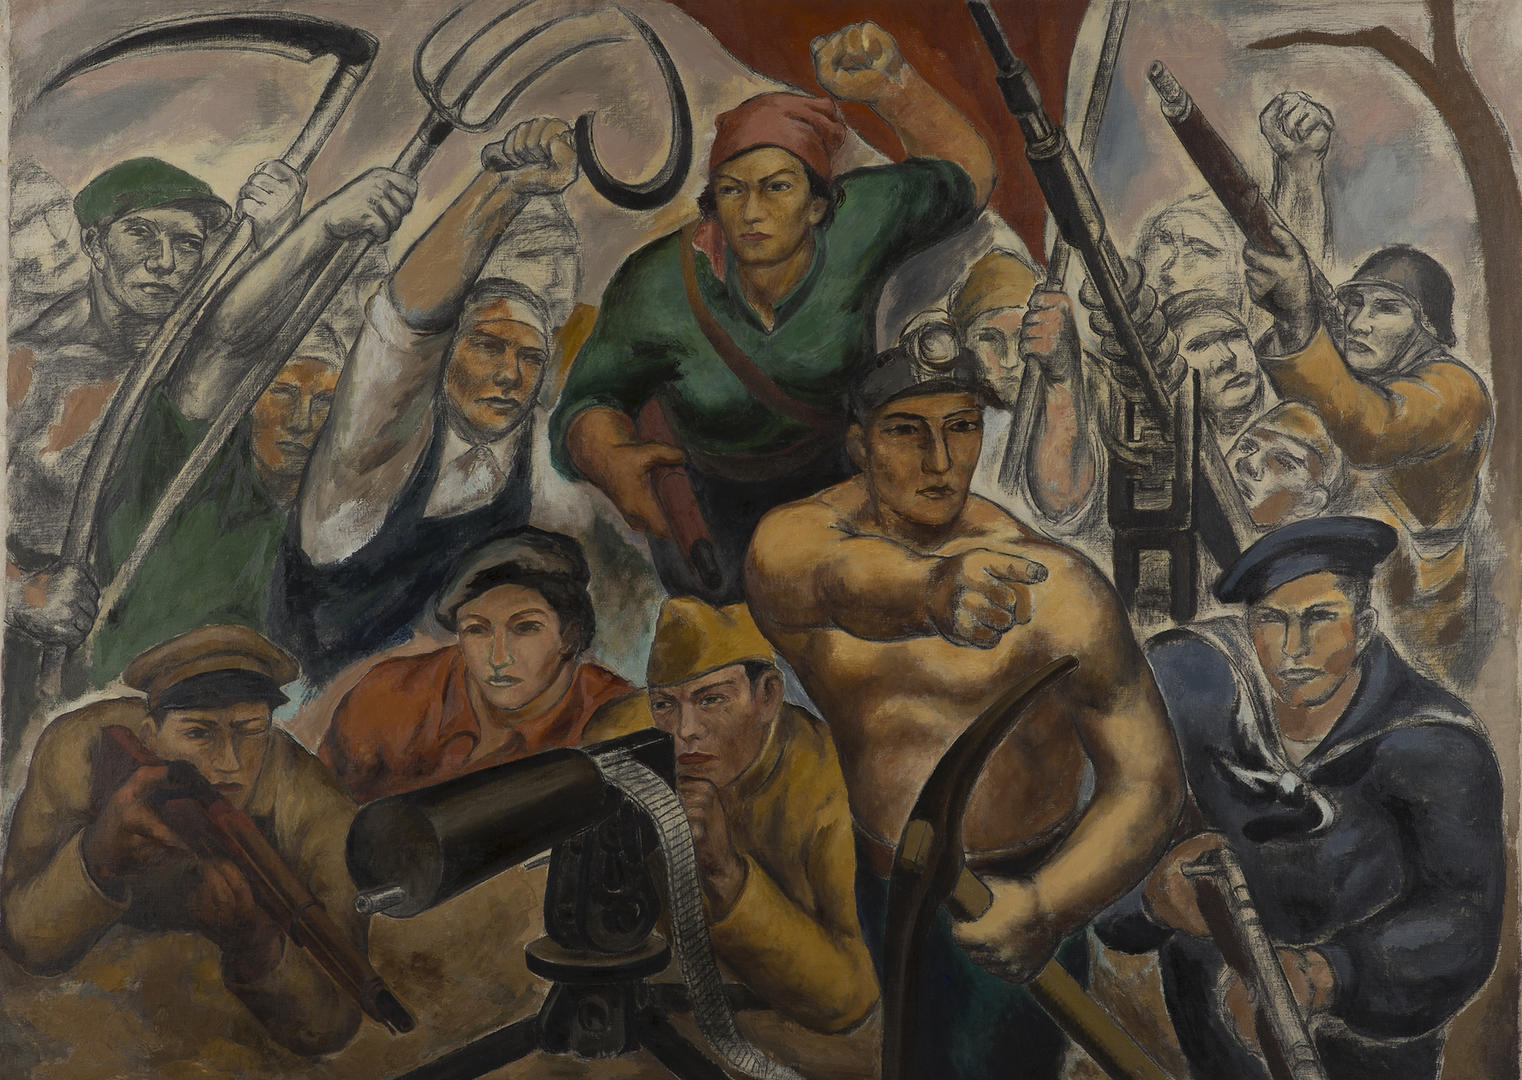 “The People’s Front” by Eitaro Ishigaki (photo: The Whitney Museum of Art)